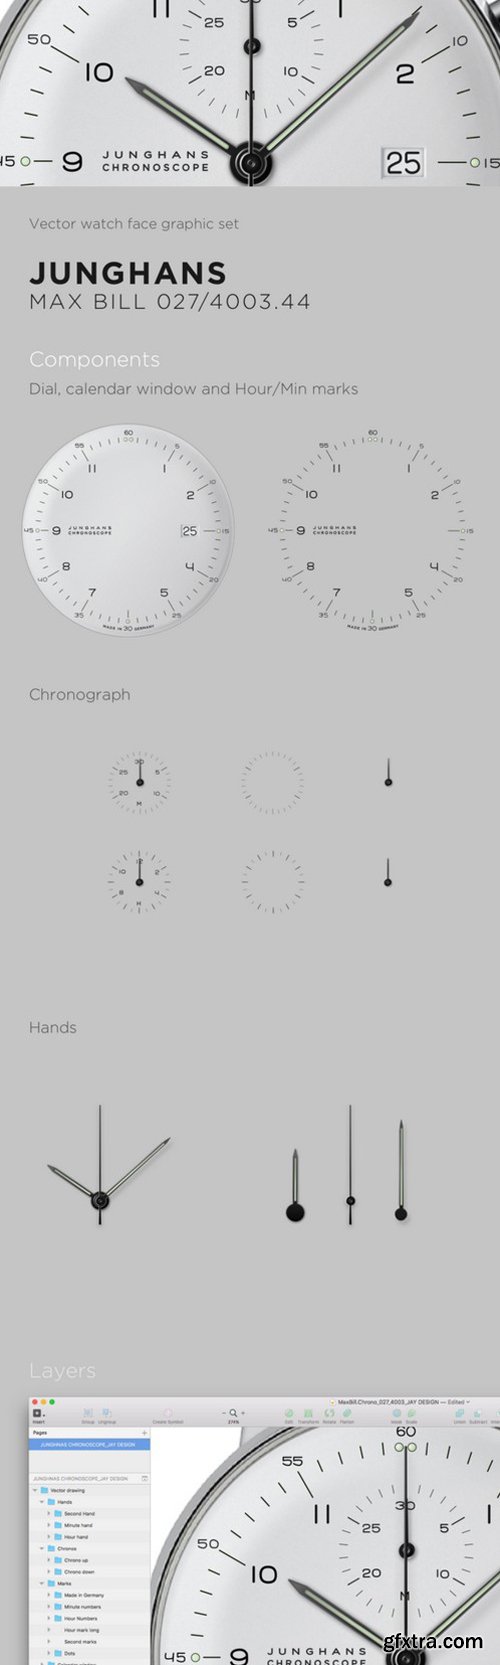 CM - Watch face vector drawing- Max Bill 761217